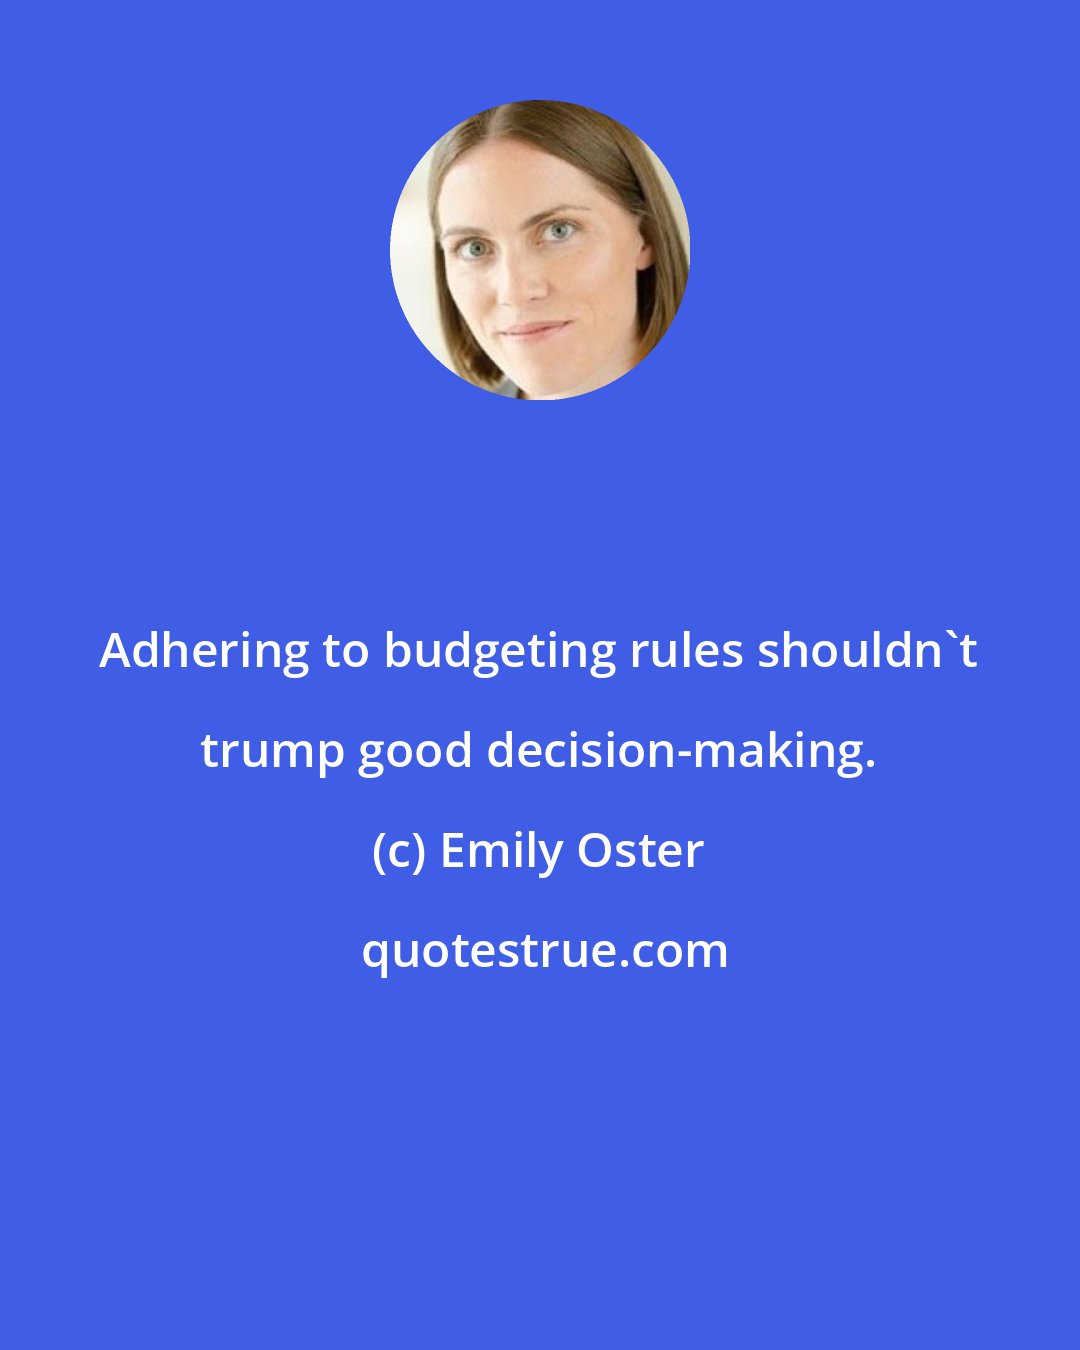 Emily Oster: Adhering to budgeting rules shouldn't trump good decision-making.